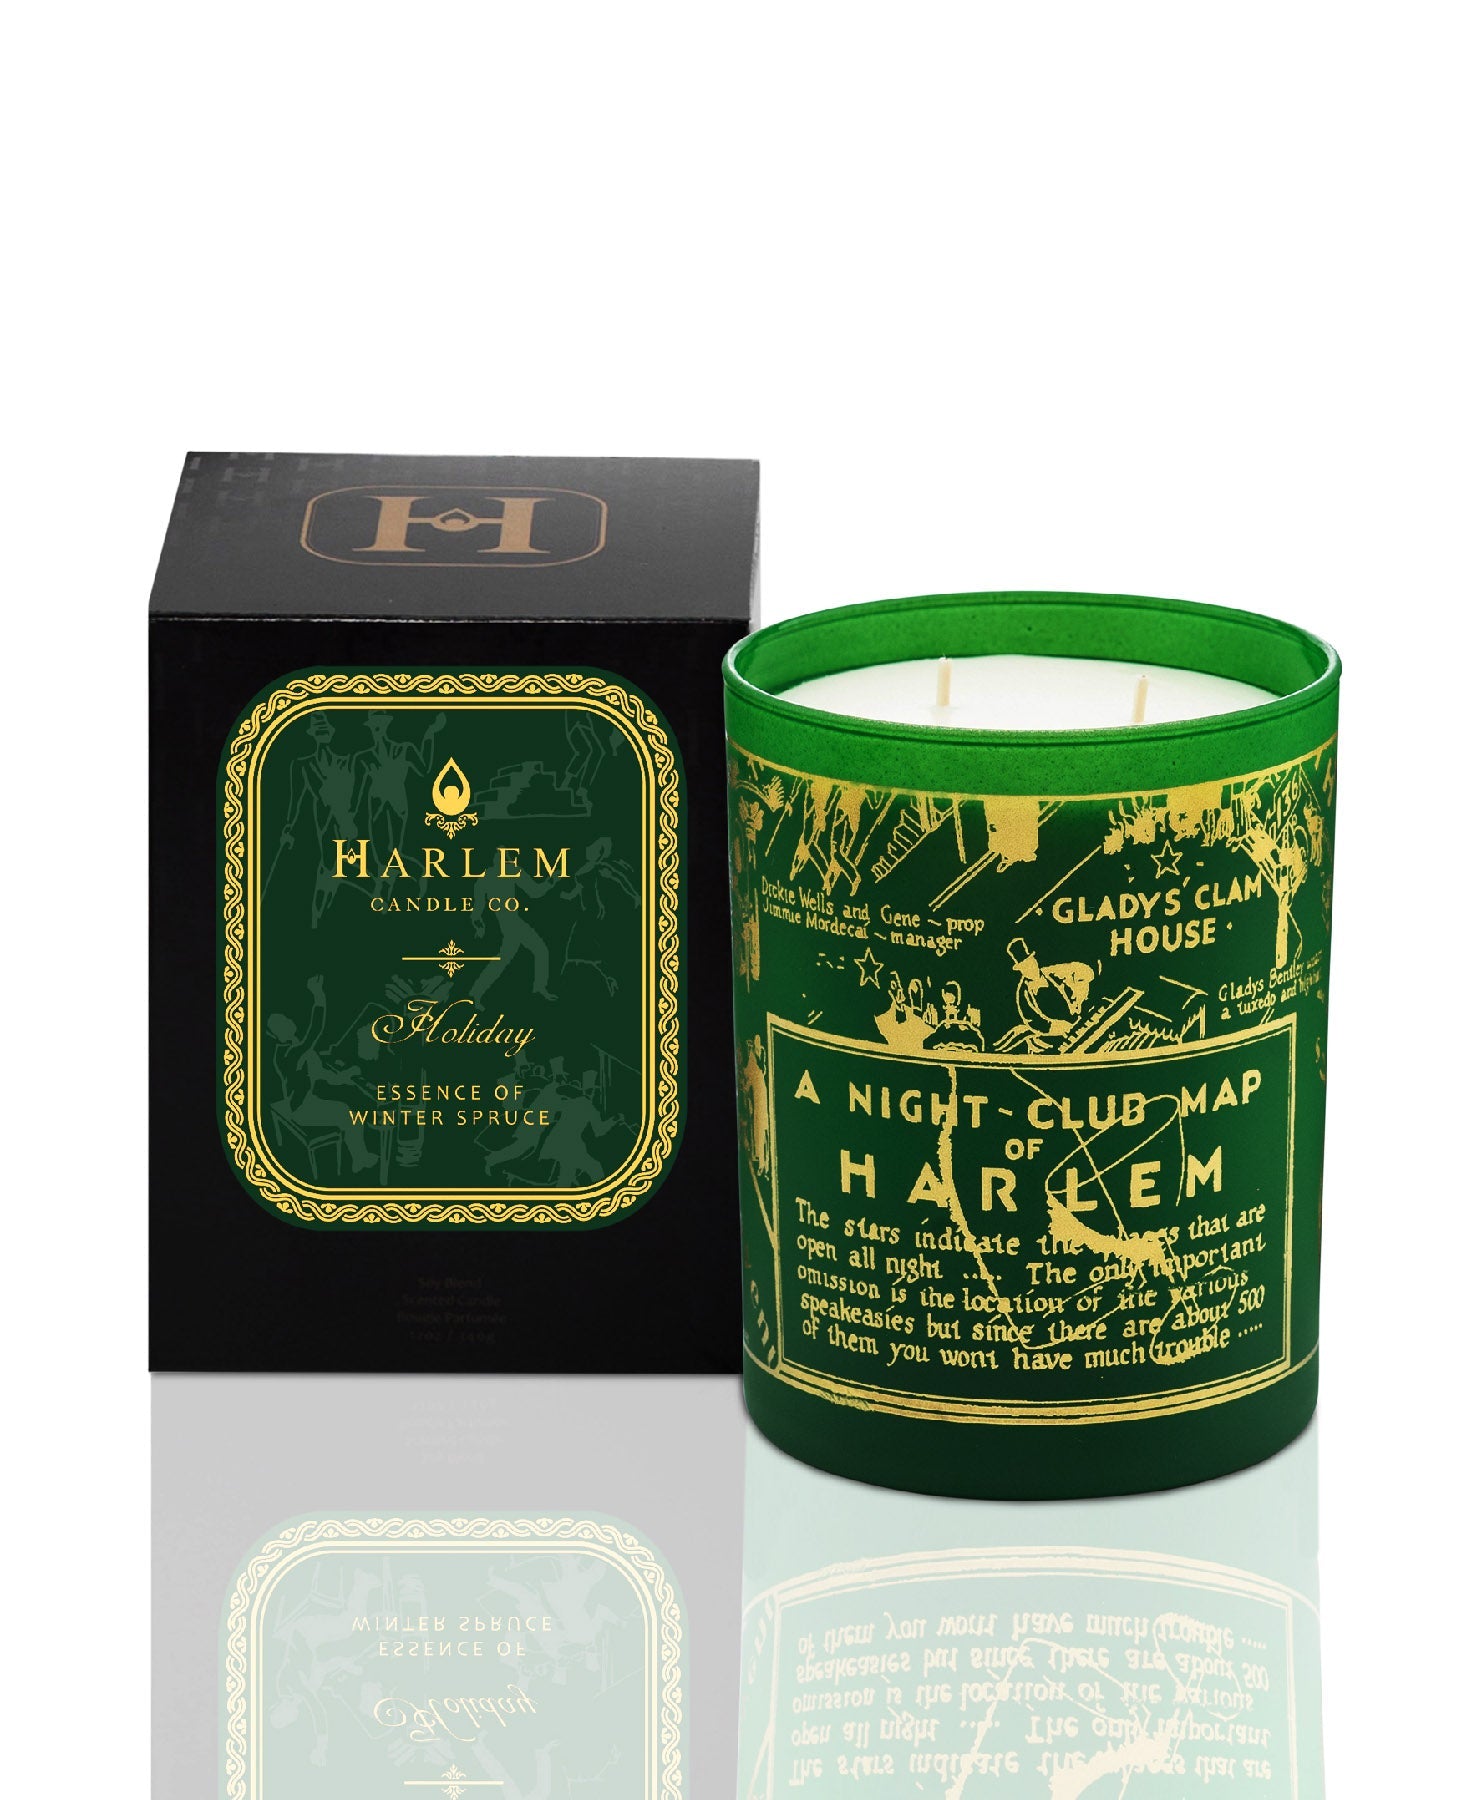 Green glass 12 oz Holiday candle with the nightclub map of harlem painted in 24K gold on the green glass on a white background sitting next to the decorative gift box.